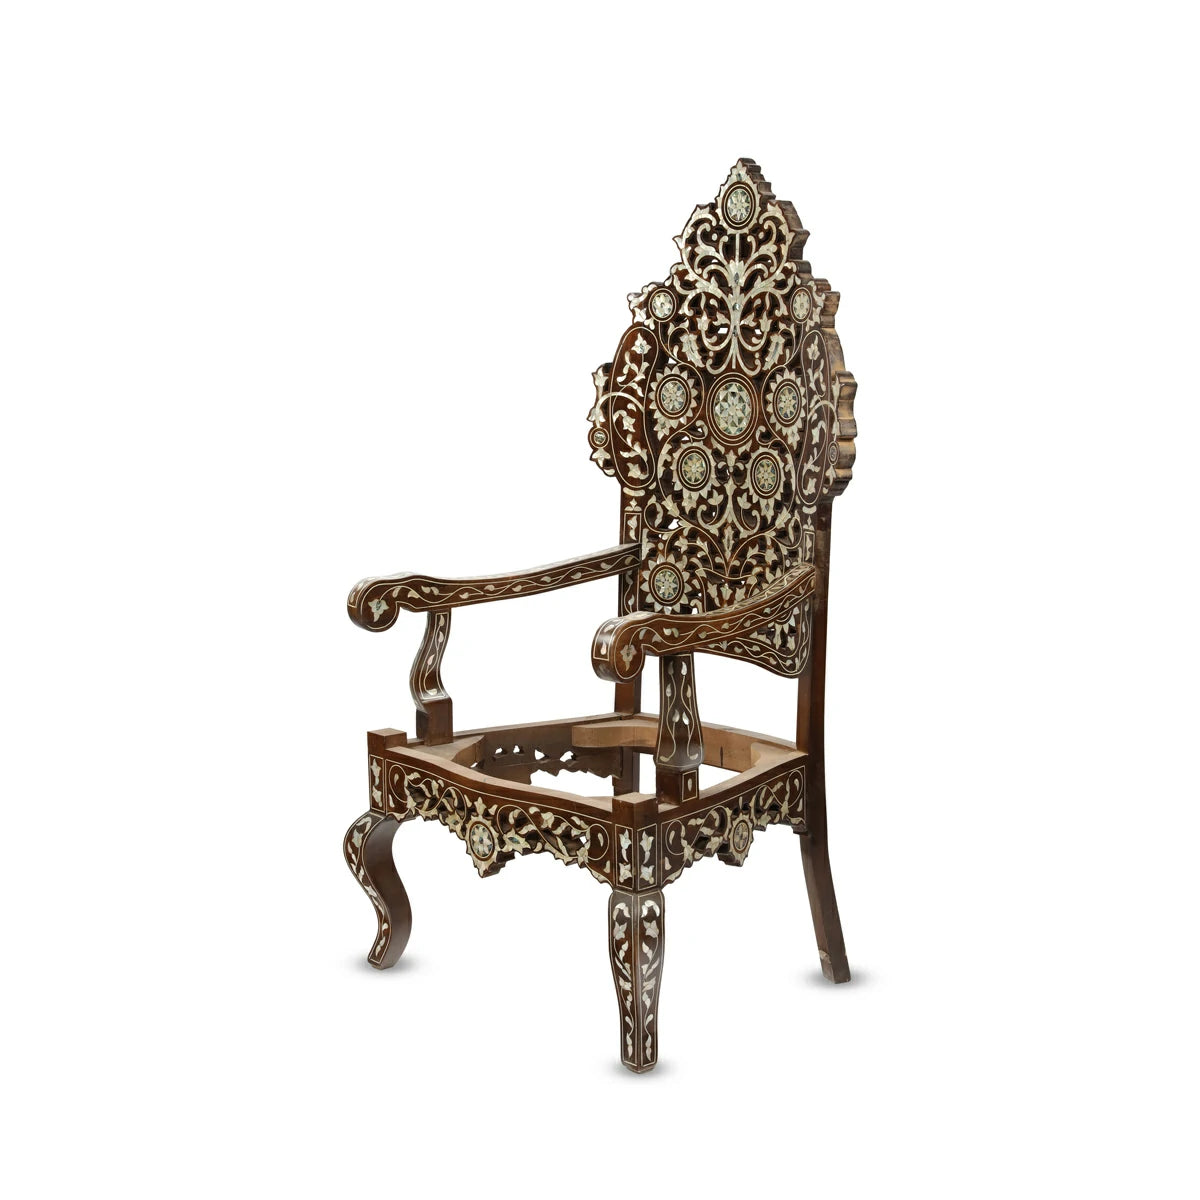 Exquisitely Hand-crafted Syrian Artisan Chair with Traditional Mother of Pearl Inlays